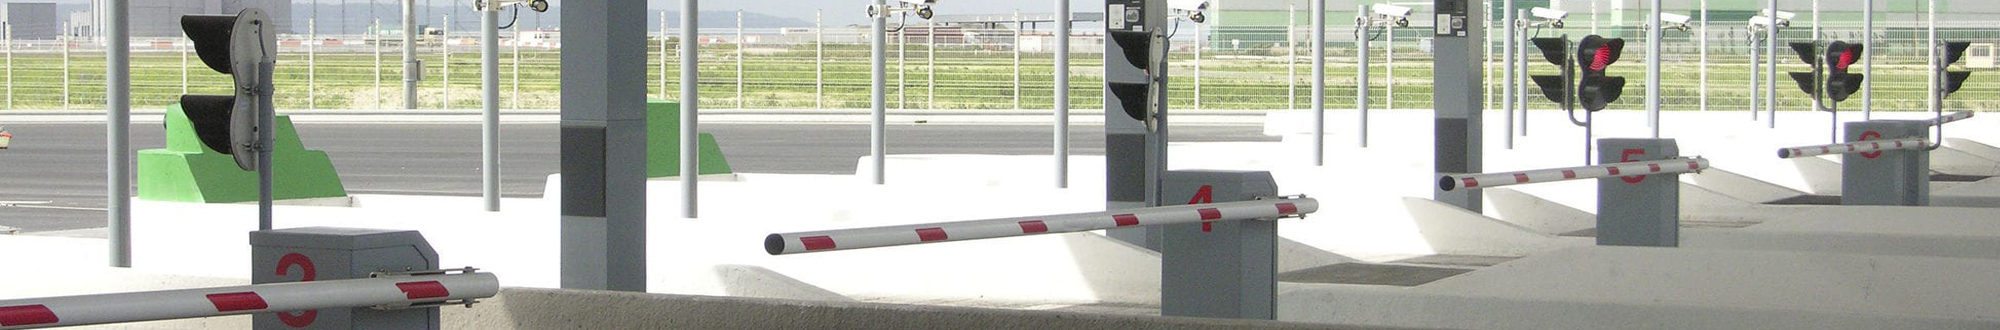 Traffic Gate Barriers Solutions & Systems